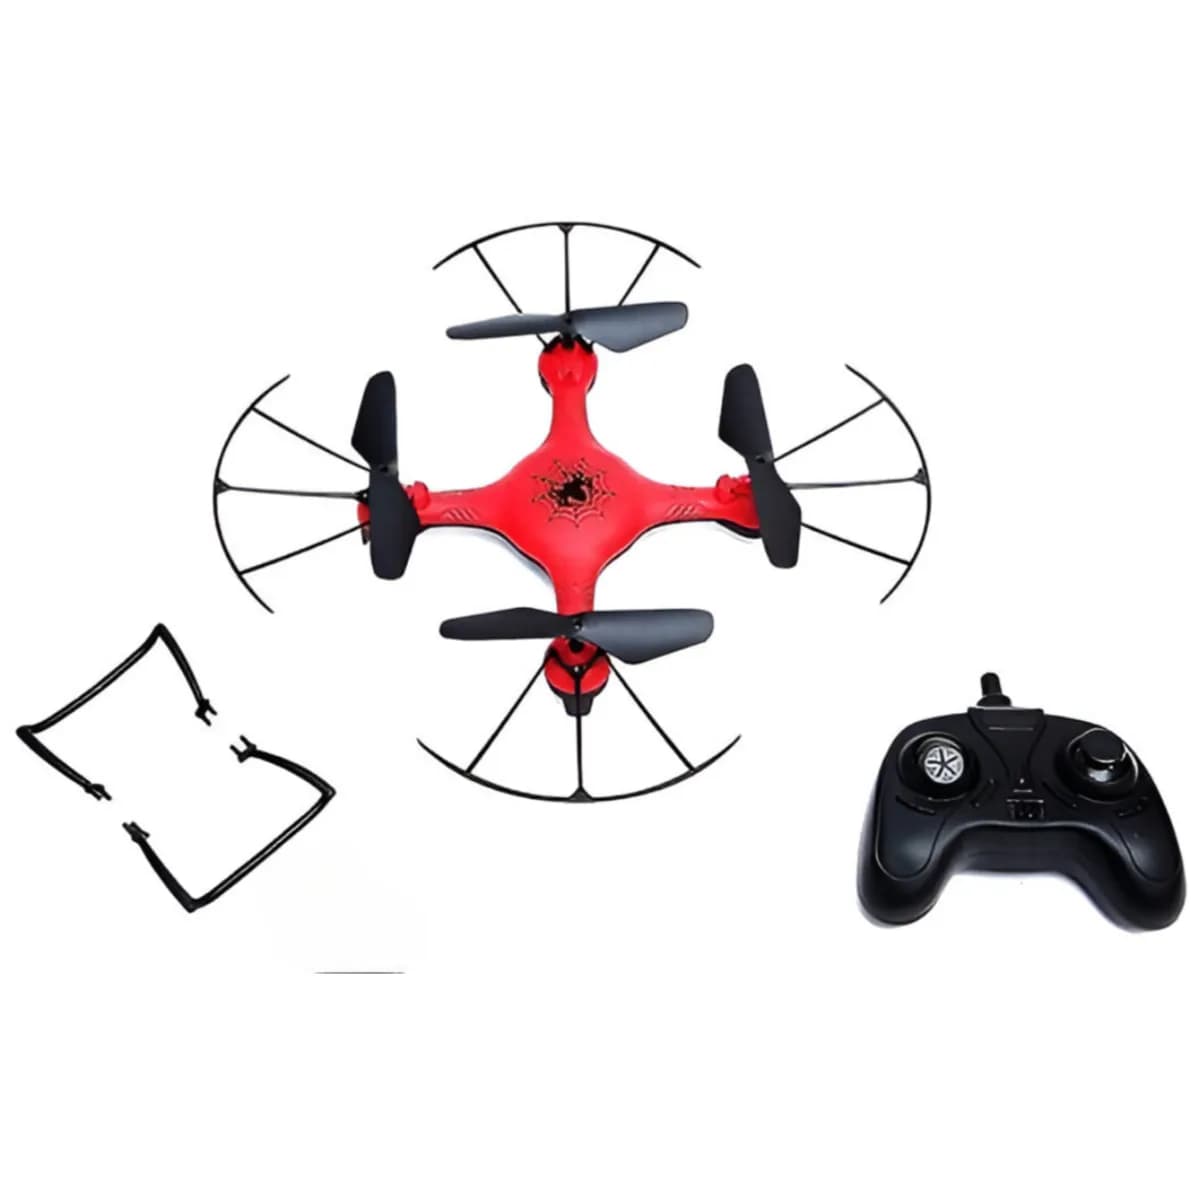 Spiderman Remote Control Aircraft Drone Toy For Kids - (DEGB05)